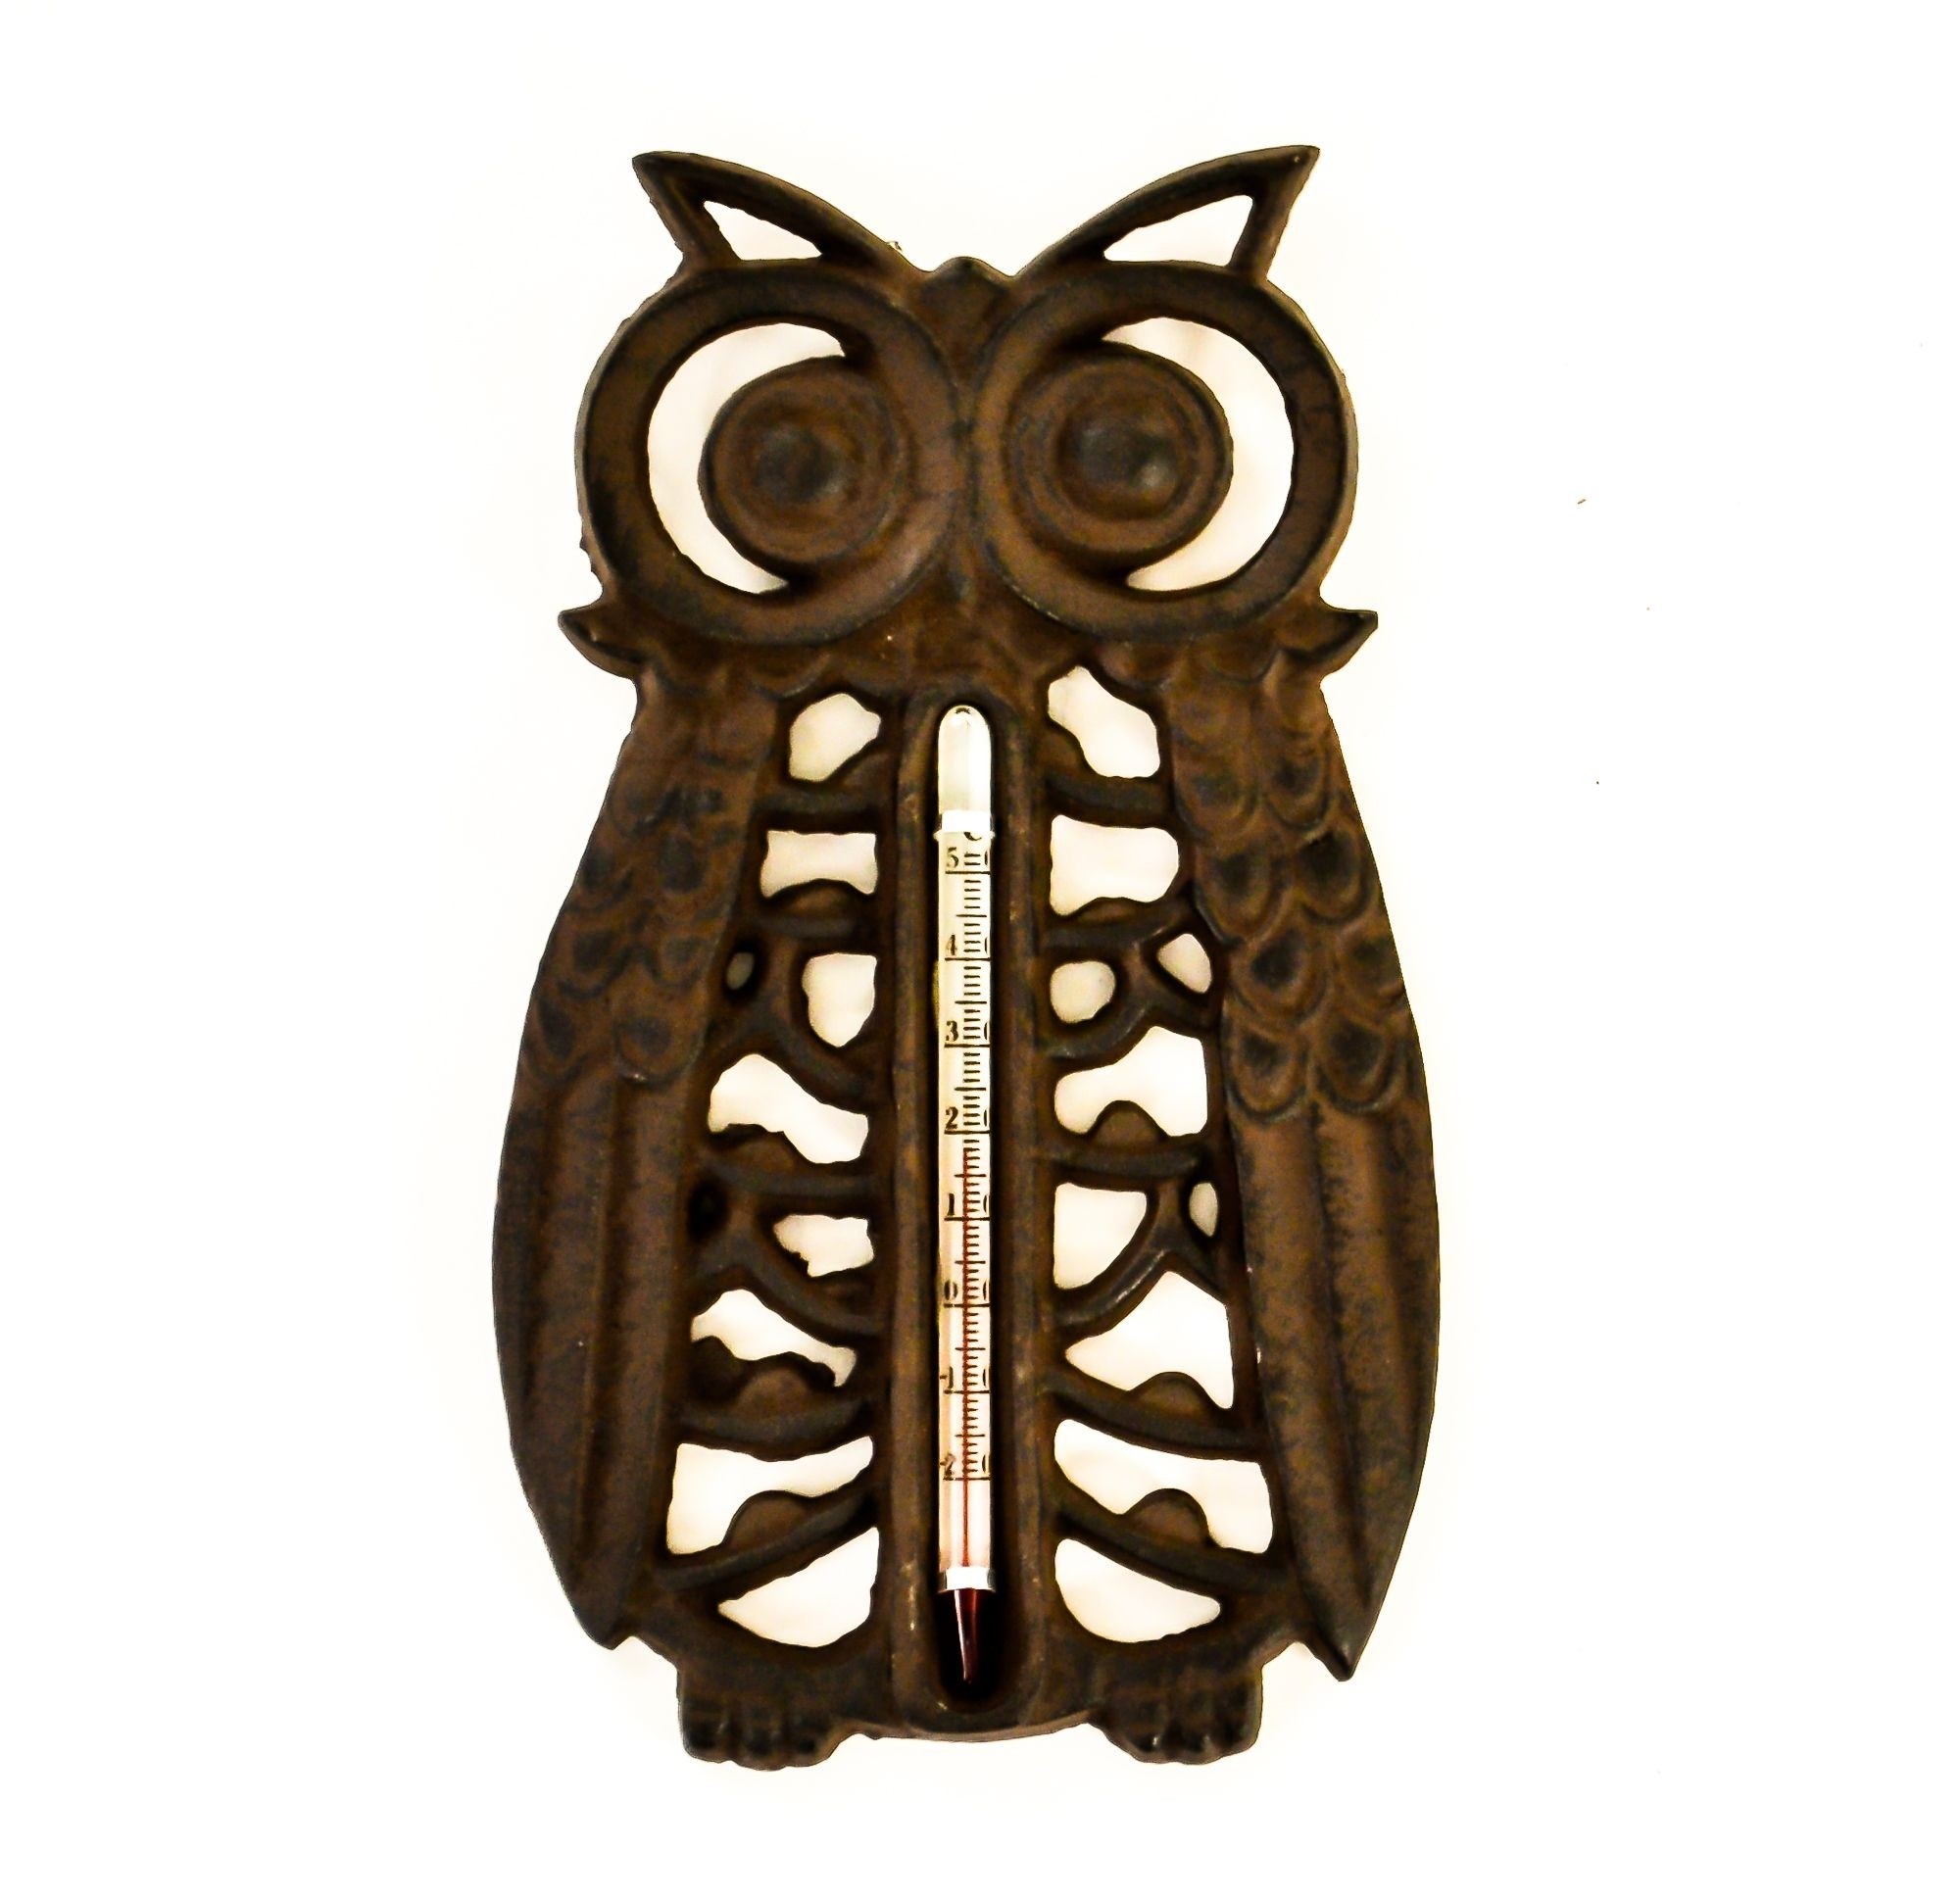 Rustic Vintage Wide Owl Cast Iron Ornate Indoor Outdoor Garden Wall Thermometer